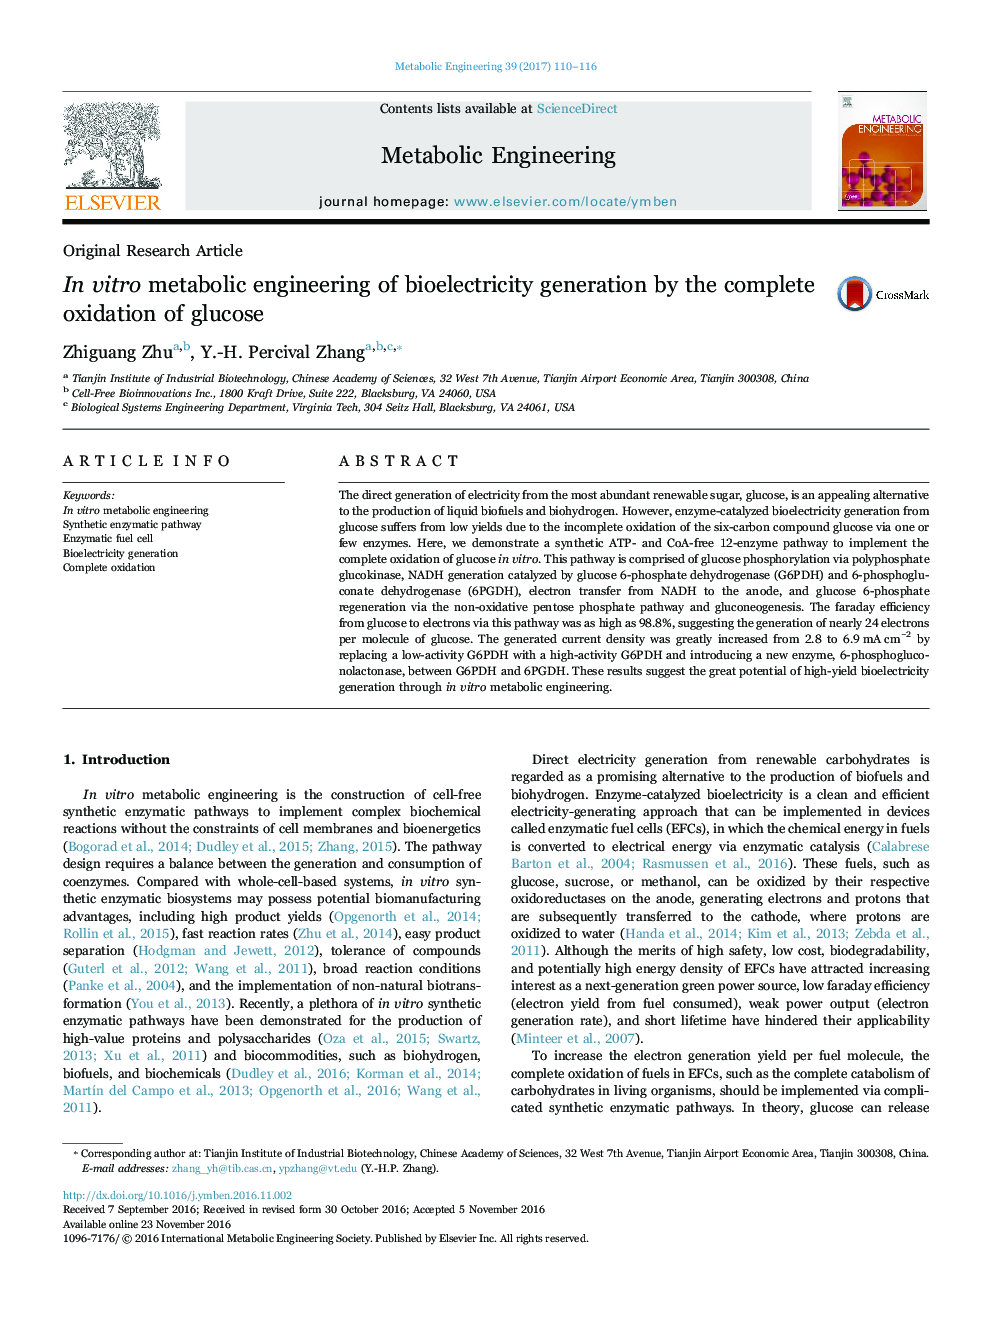 Original Research ArticleIn vitro metabolic engineering of bioelectricity generation by the complete oxidation of glucose